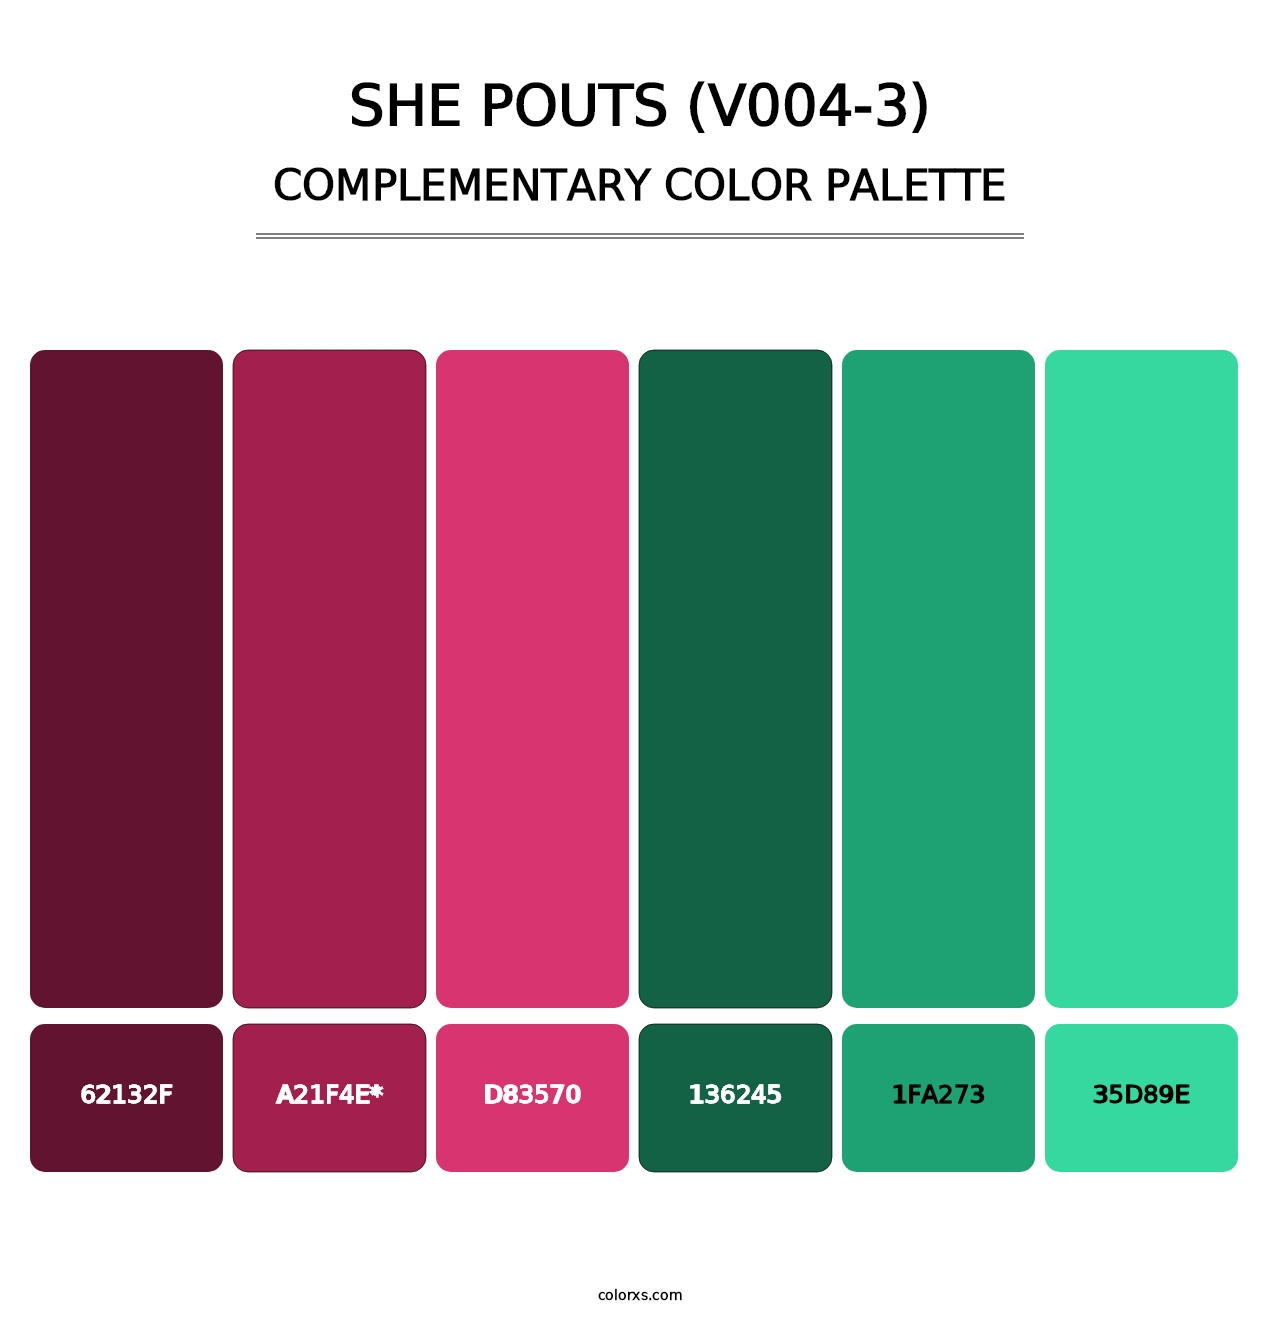 She Pouts (V004-3) - Complementary Color Palette